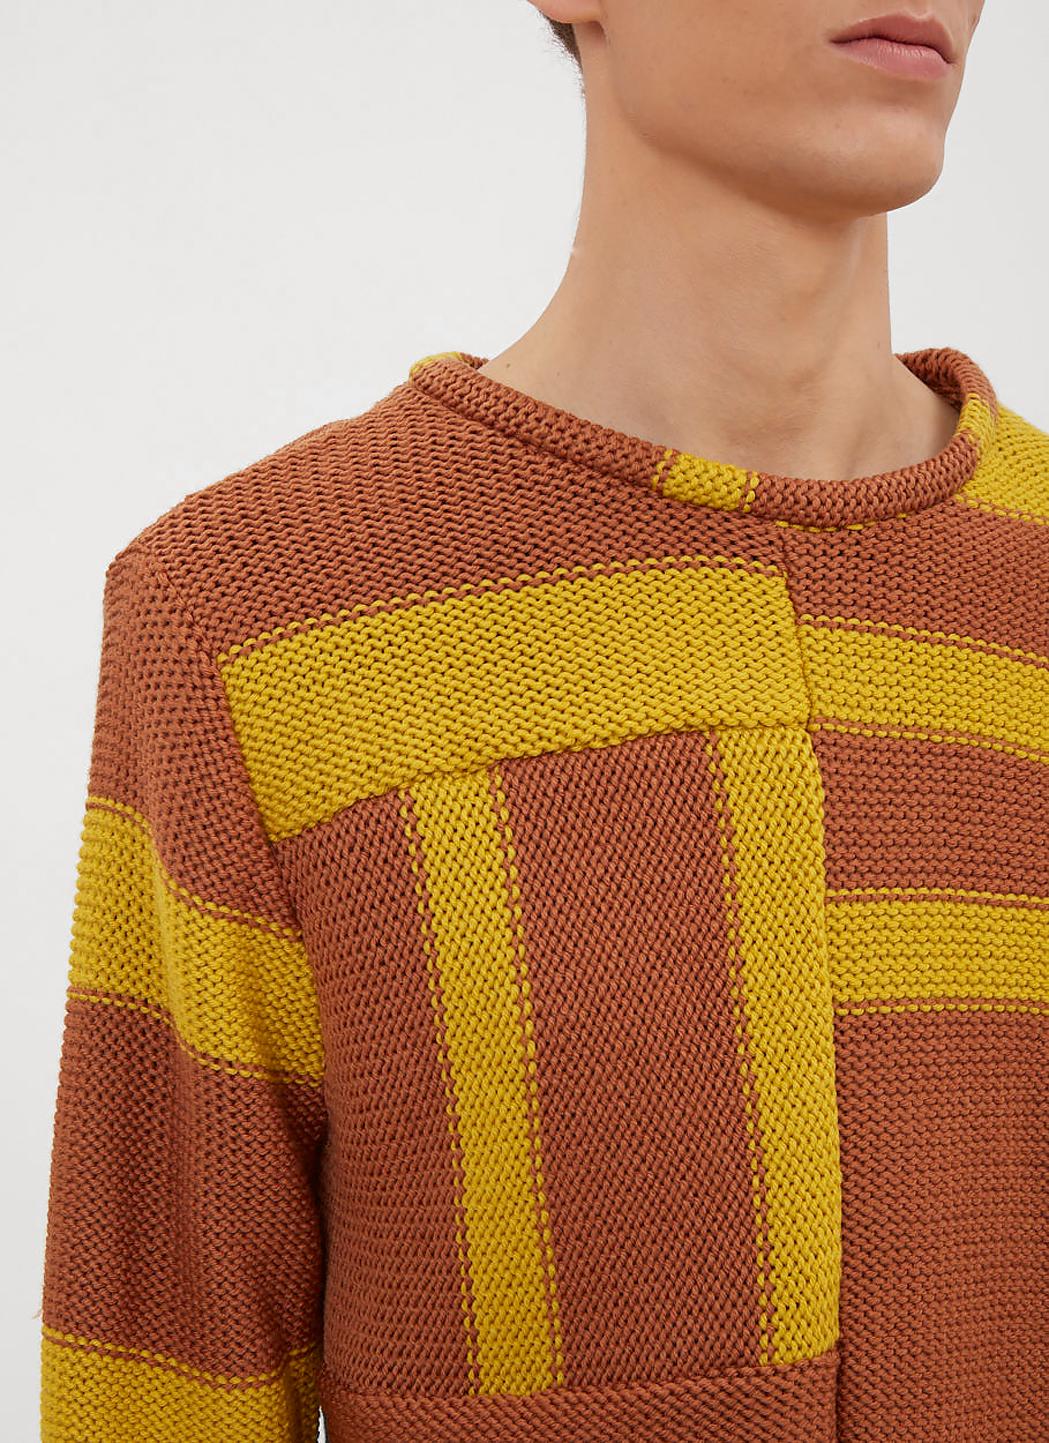 Lyst - Eckhaus Latta Anxiety Relief Knit Sweater In Brown in Brown for Men